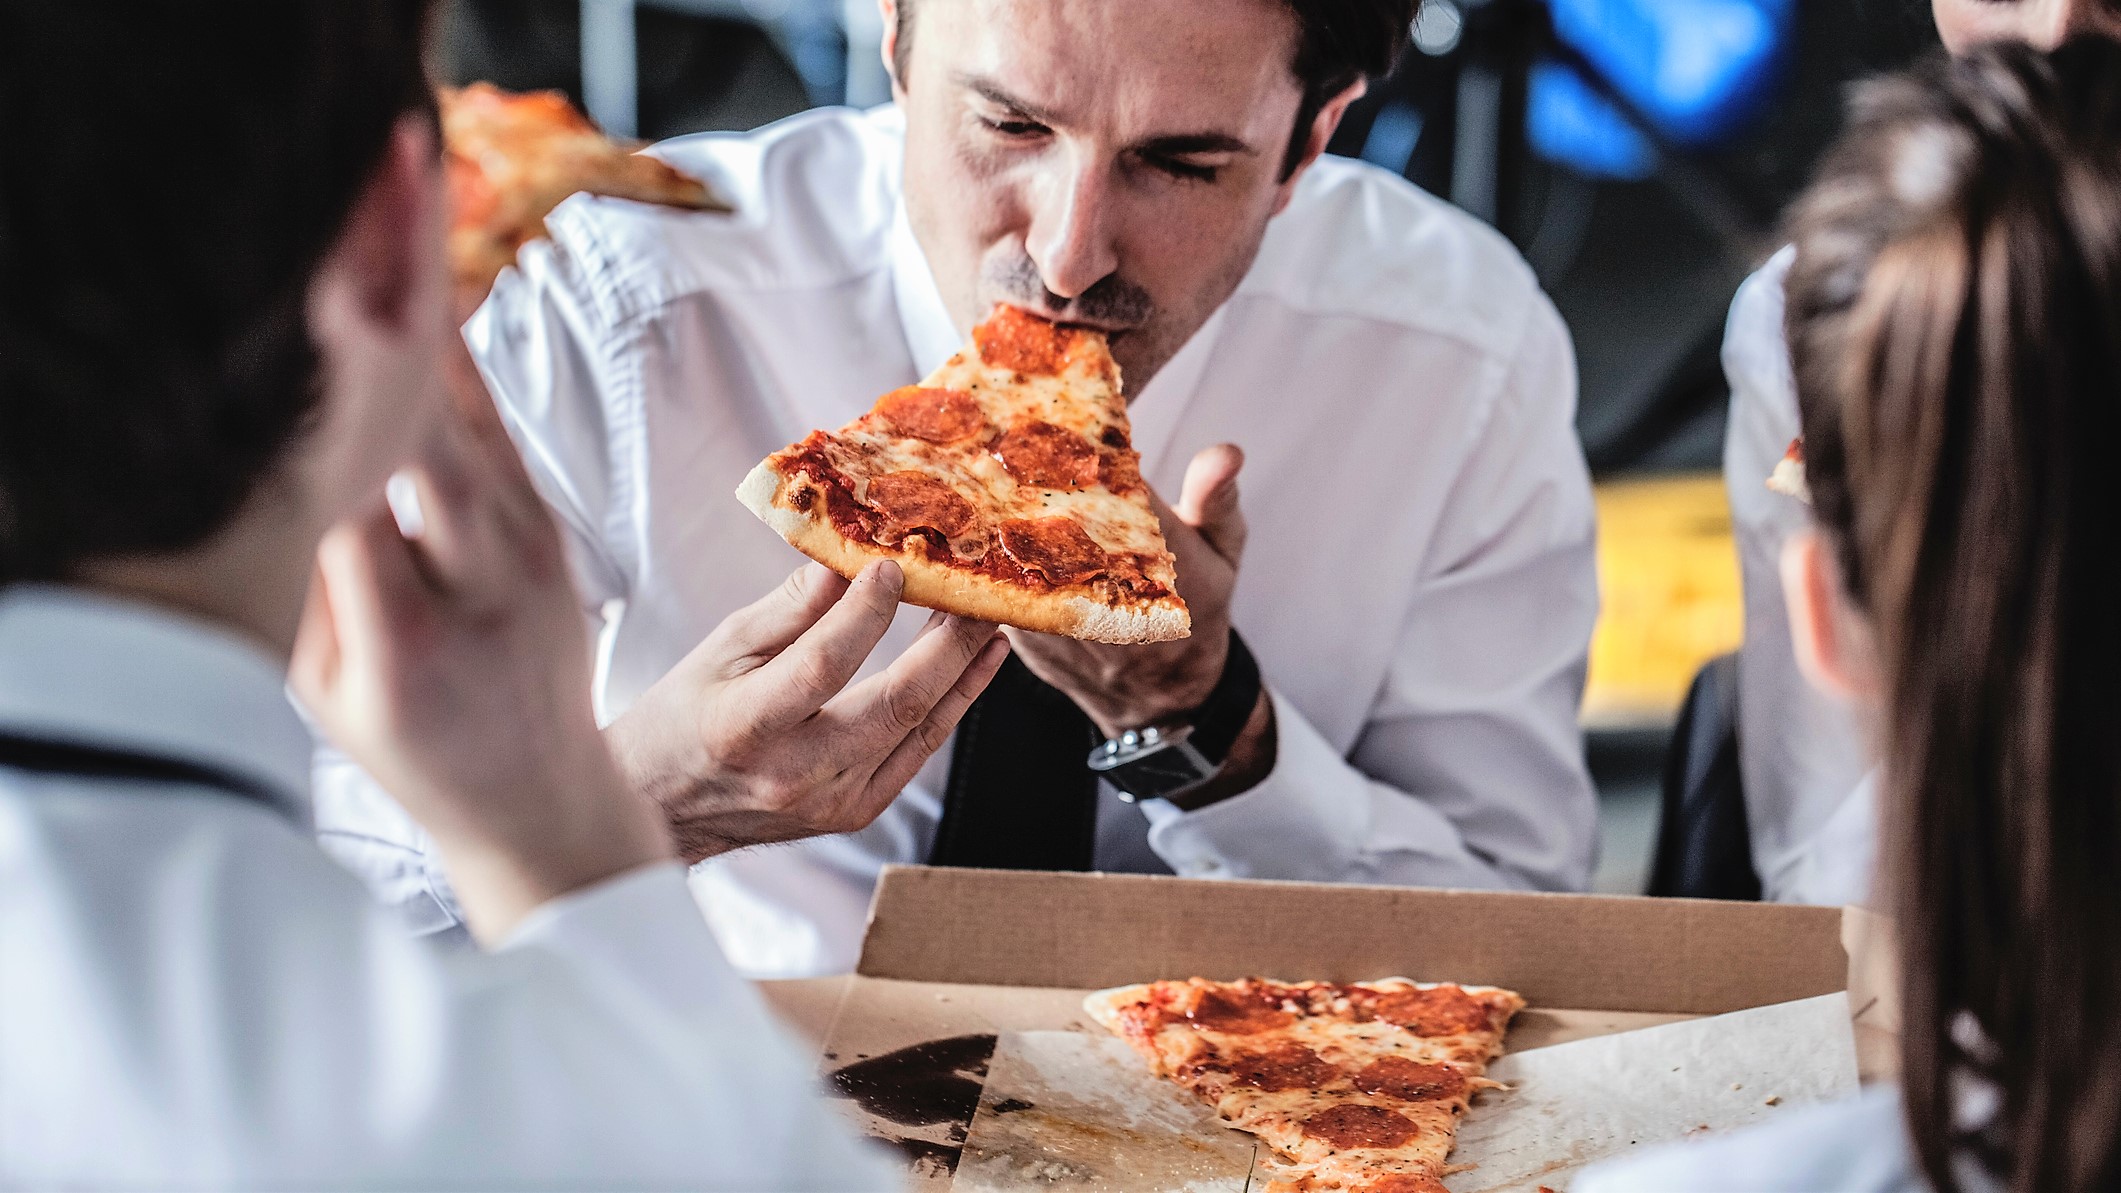 Business team in suits eat pizza together